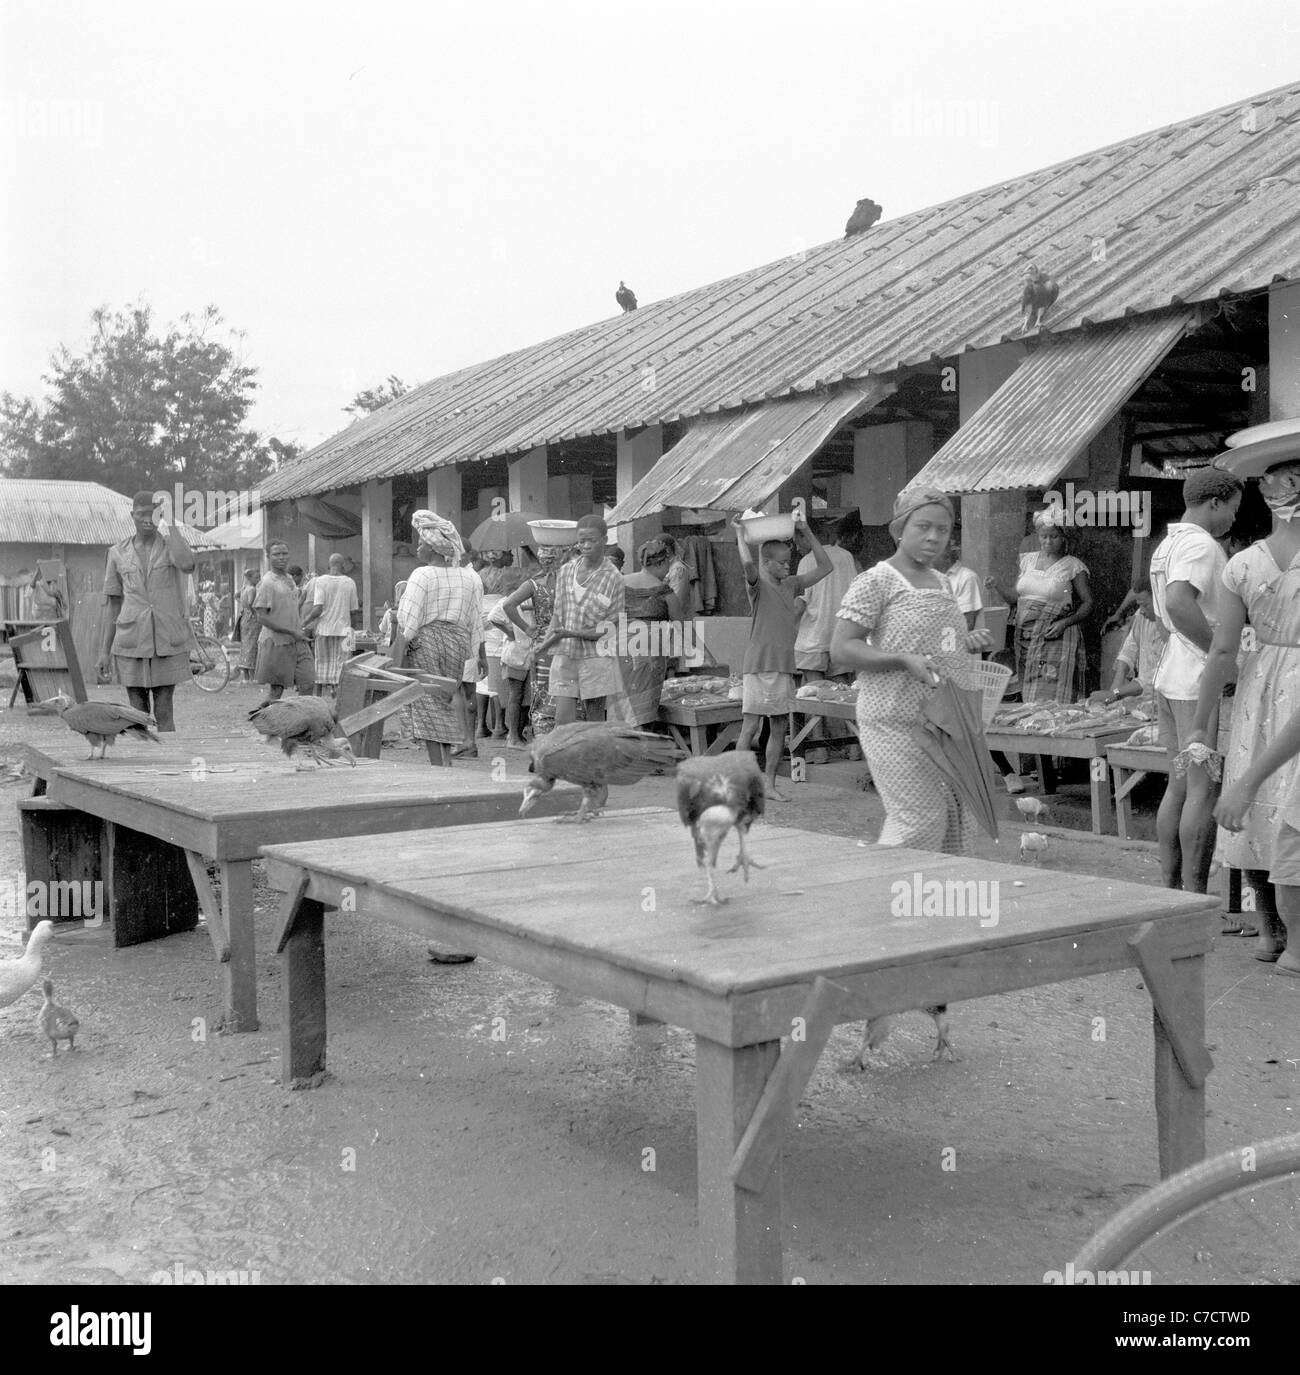 Nigeria,1950s, native african people at  a village market with live chickens for sale standing on wooden tables in the muddly area outside, Stock Photo